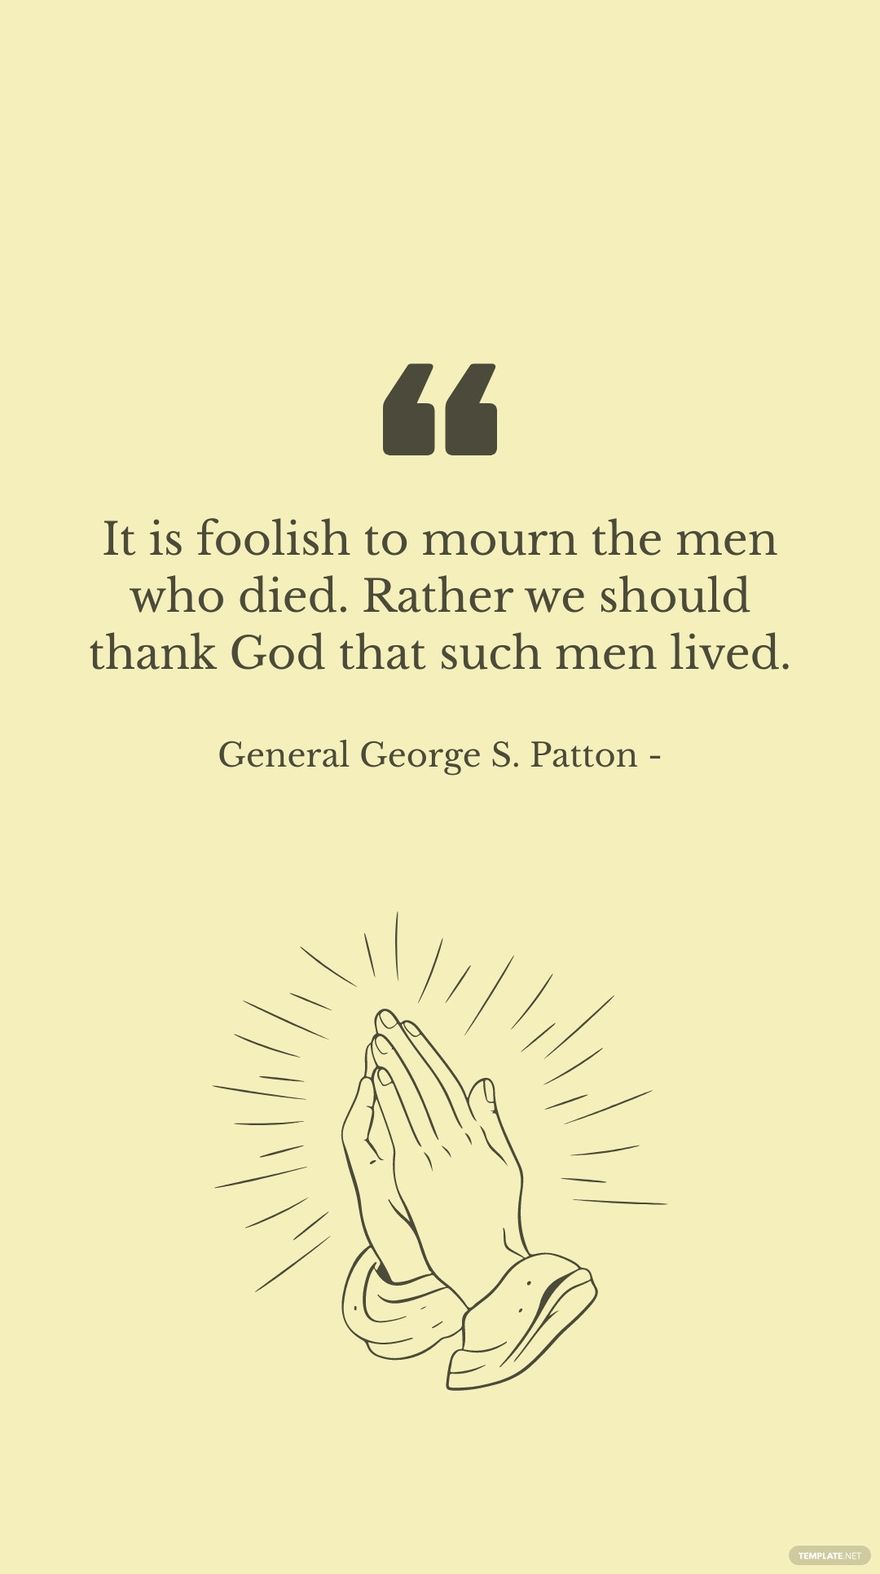 General George S. Patton - It is foolish to mourn the men who died. Rather we should thank God that such men lived.